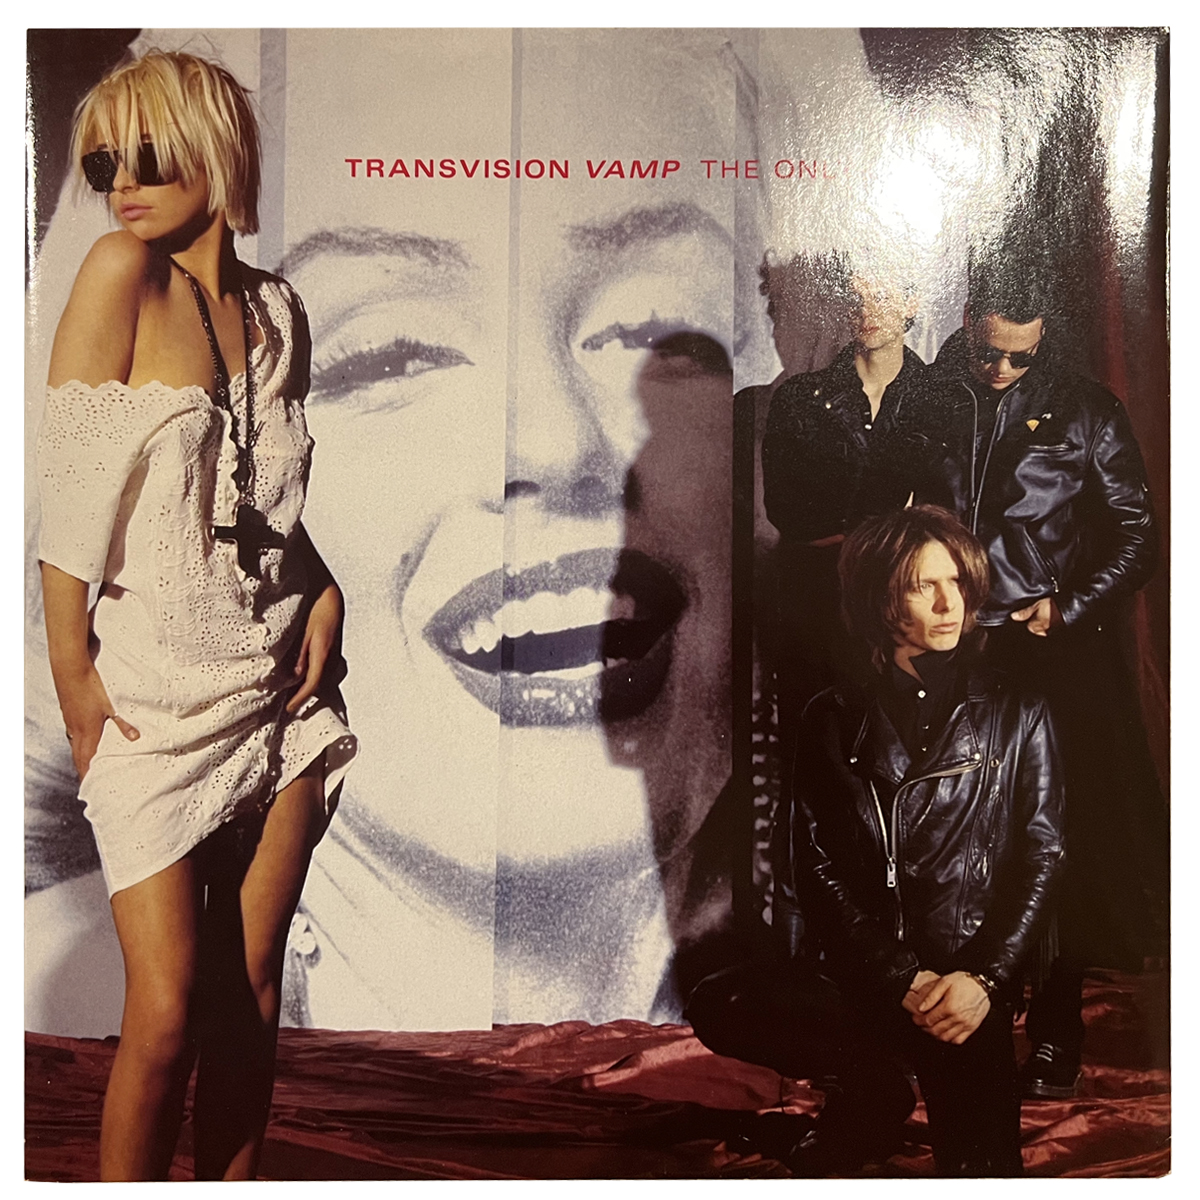 TRANSVISION VAMP ‘THE ONLY ONE’ 12” VINYL SINGLE 1991